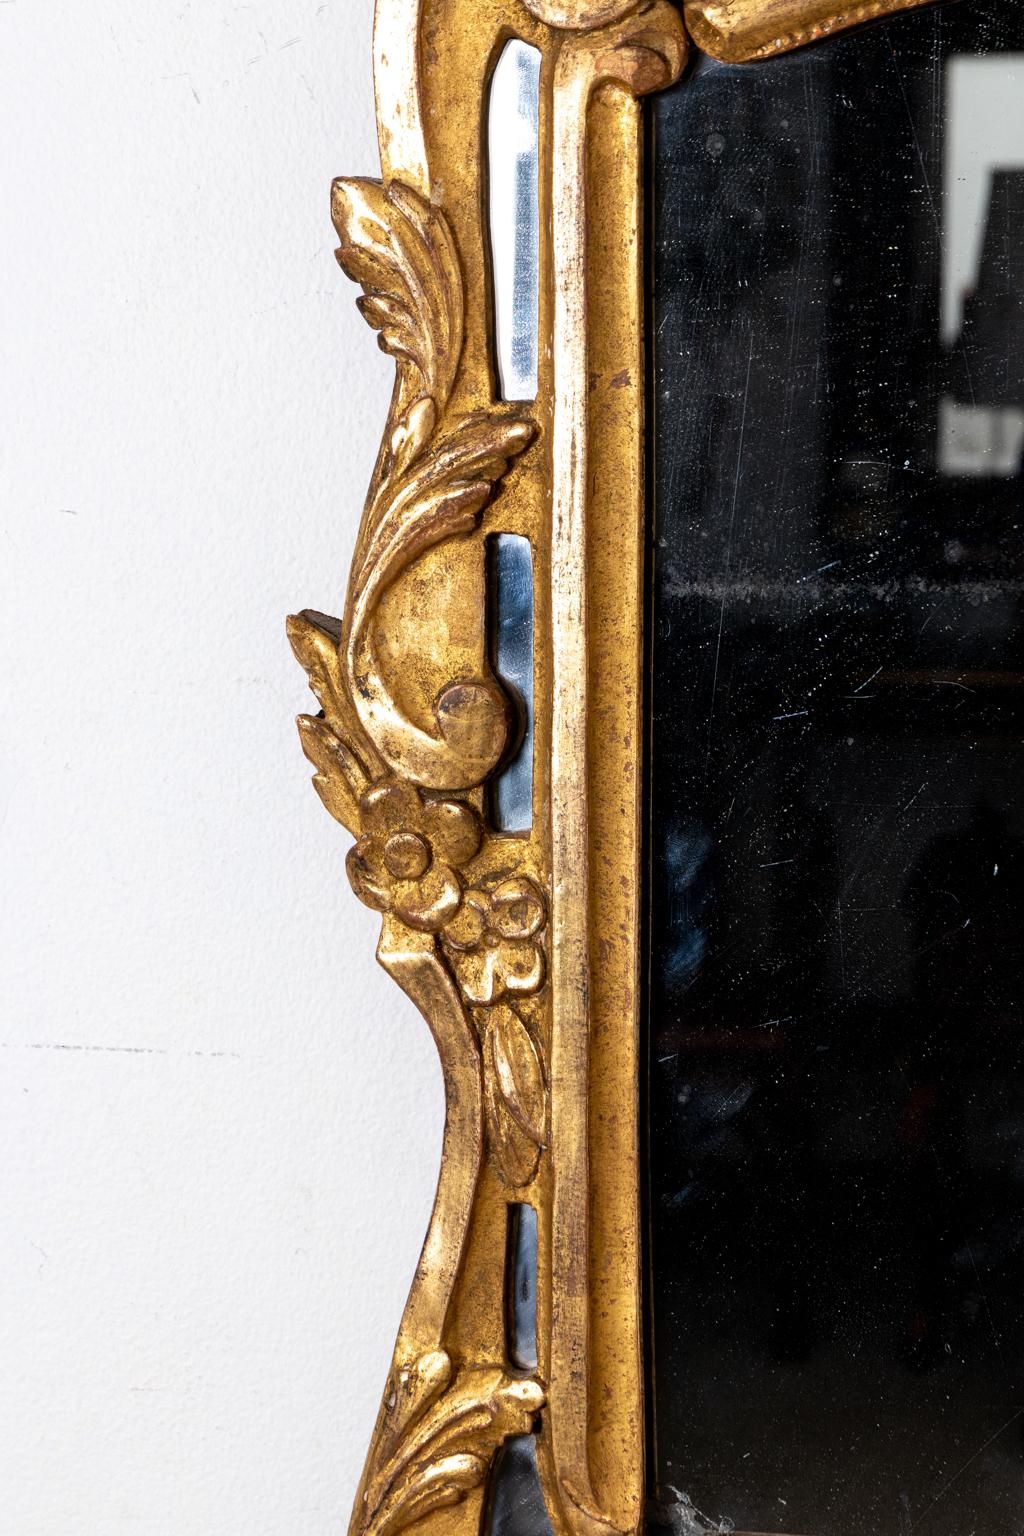 Circa 1890s antique giltwood mirror with dark accent paint, ornate crown, c-scrolls, and floral motifs surrounding the frame. The crown features three plumes of feathers on top of a carved medieval style helmet with draped floral swags framing a